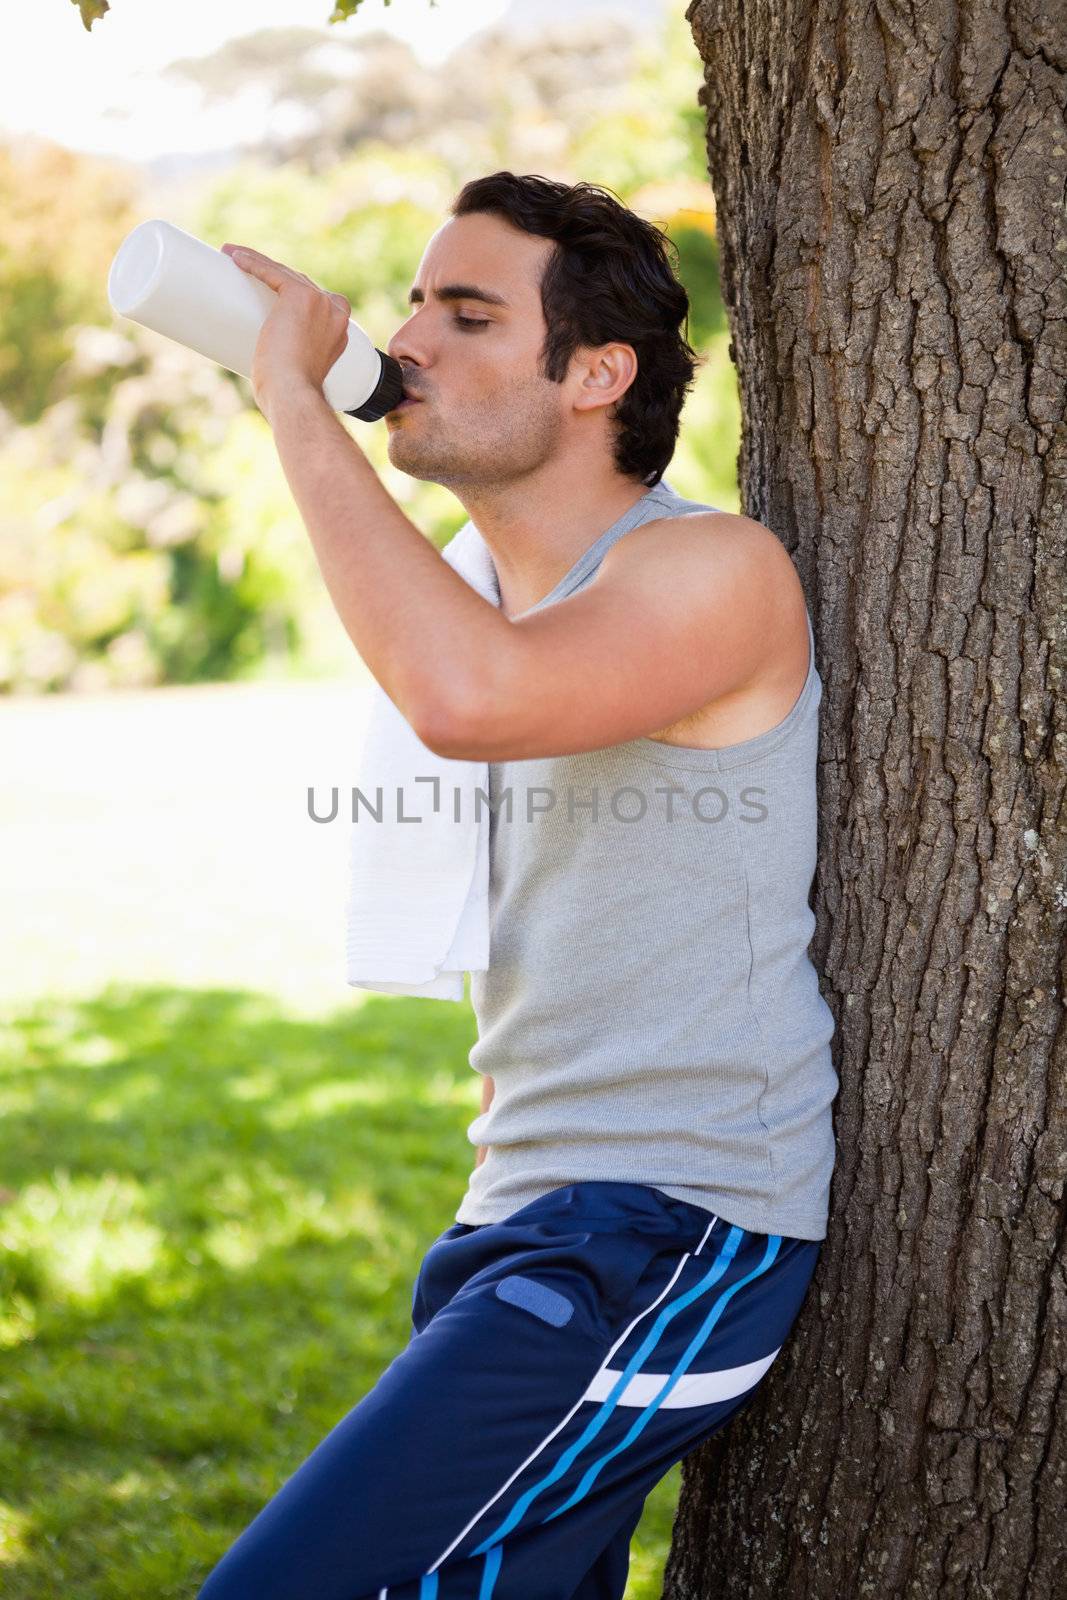 Man with a towel on his shoulder drinking from a water bottle while resting against the trunk of a tree